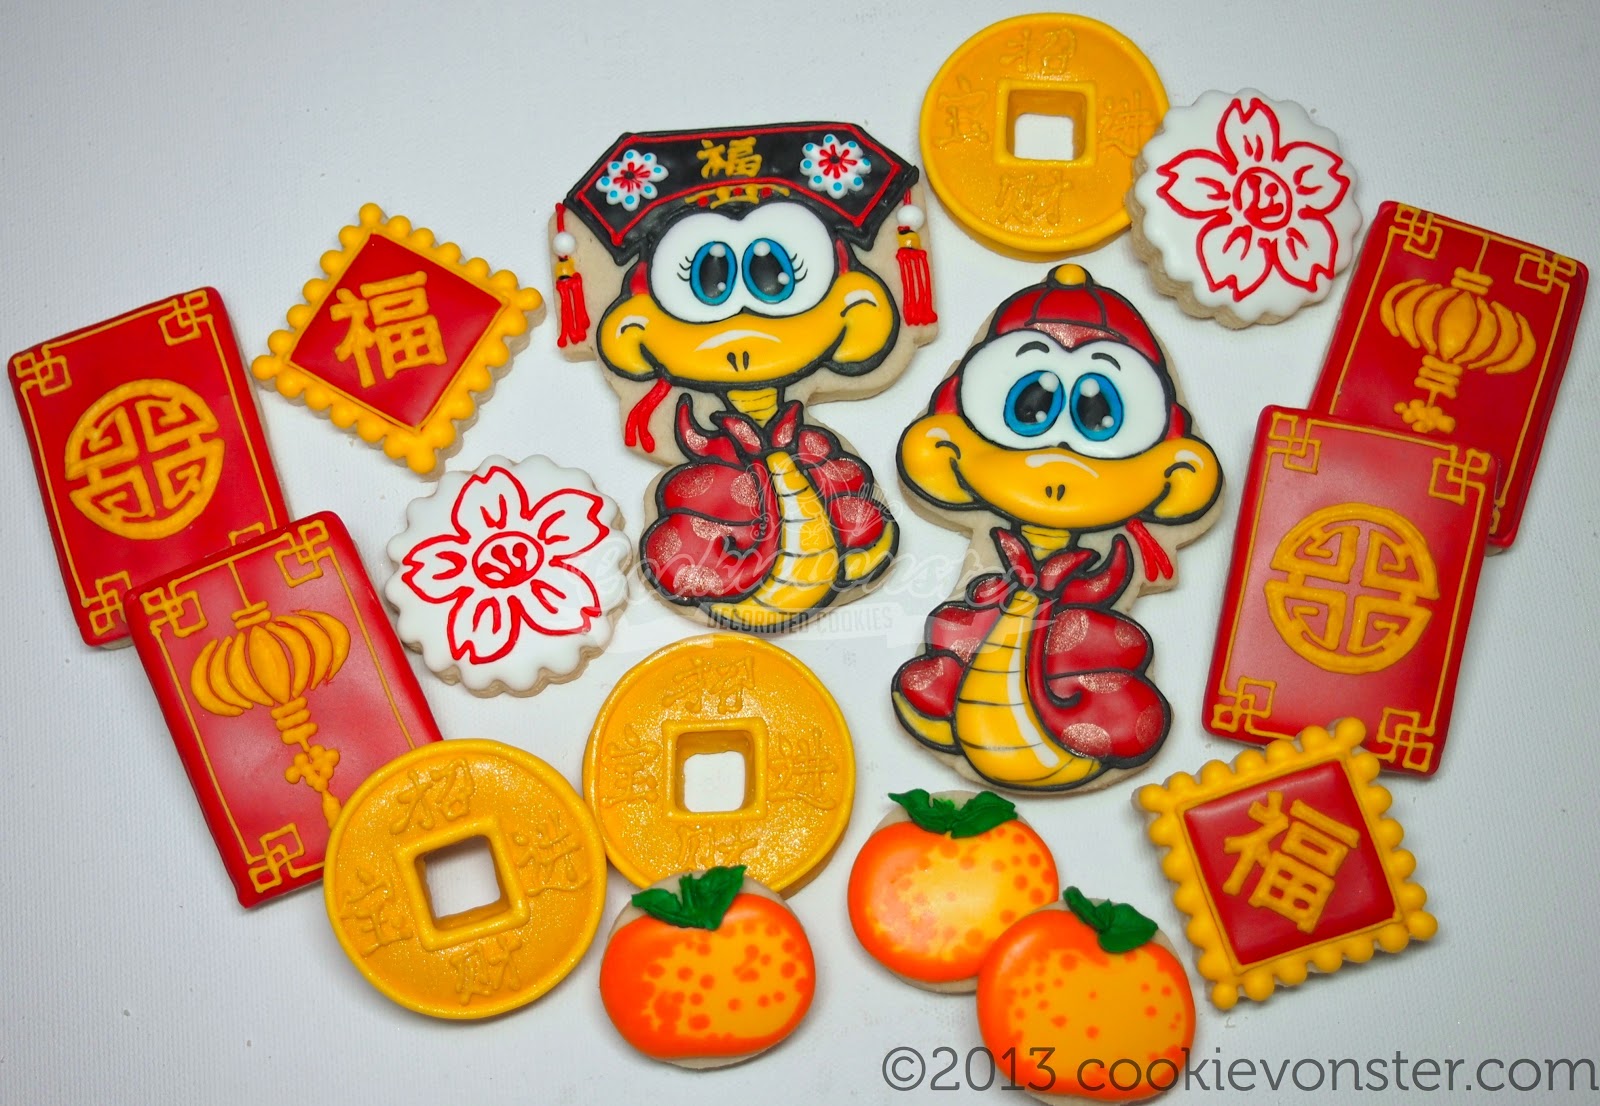 Cookievonster Custom Cookies, Vancouver BC: Chinese New ...